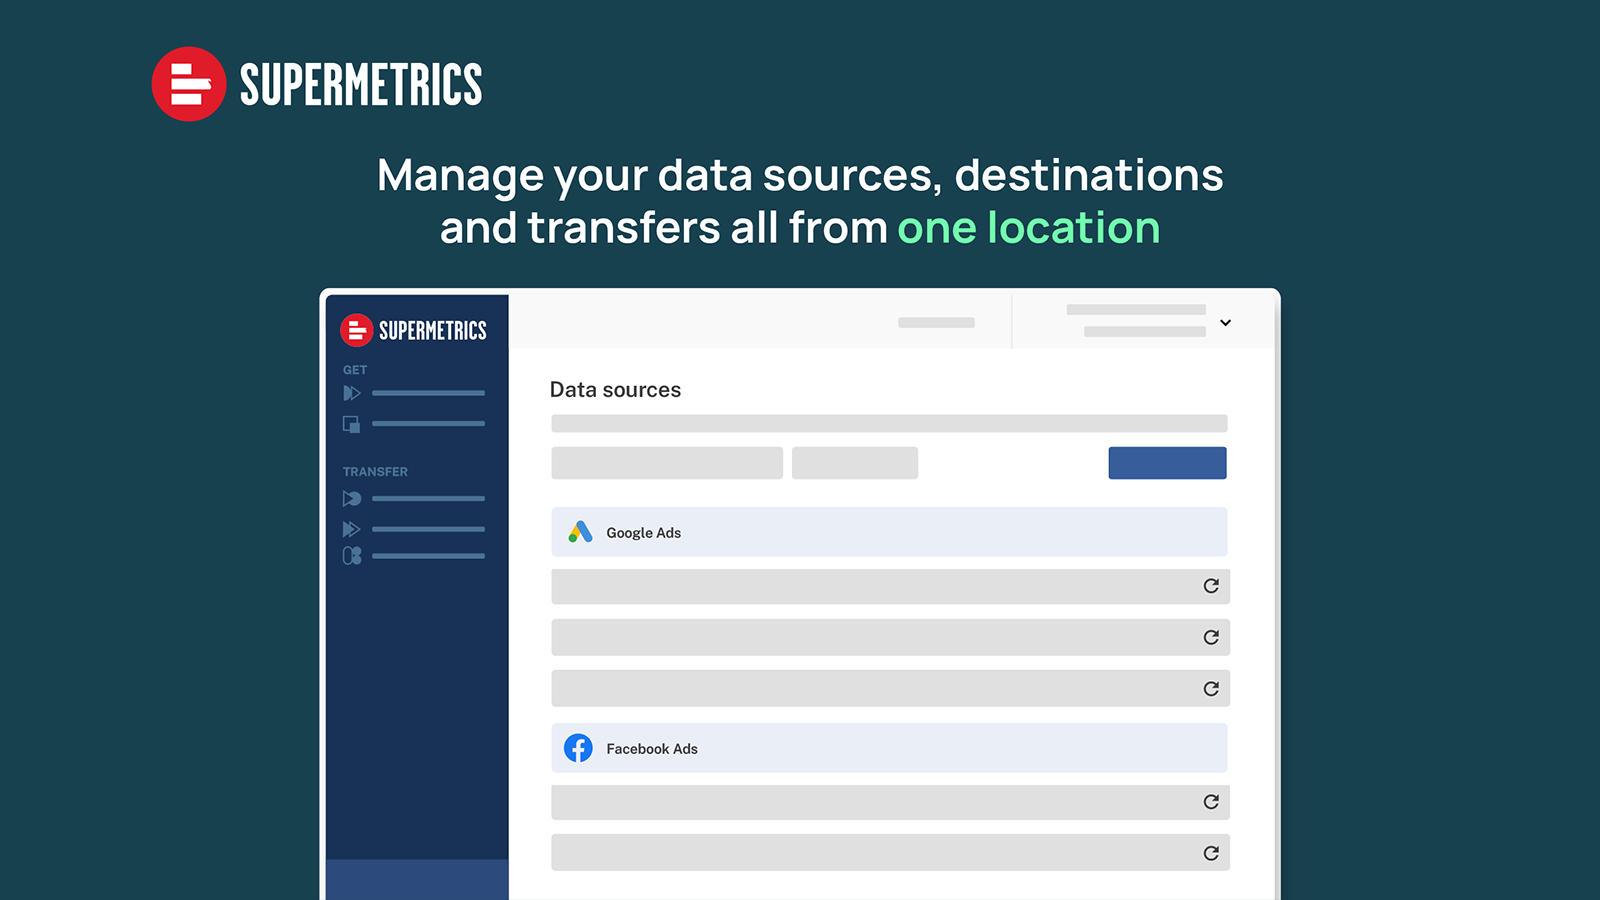 Manage your data sources, destinations, and transfers.